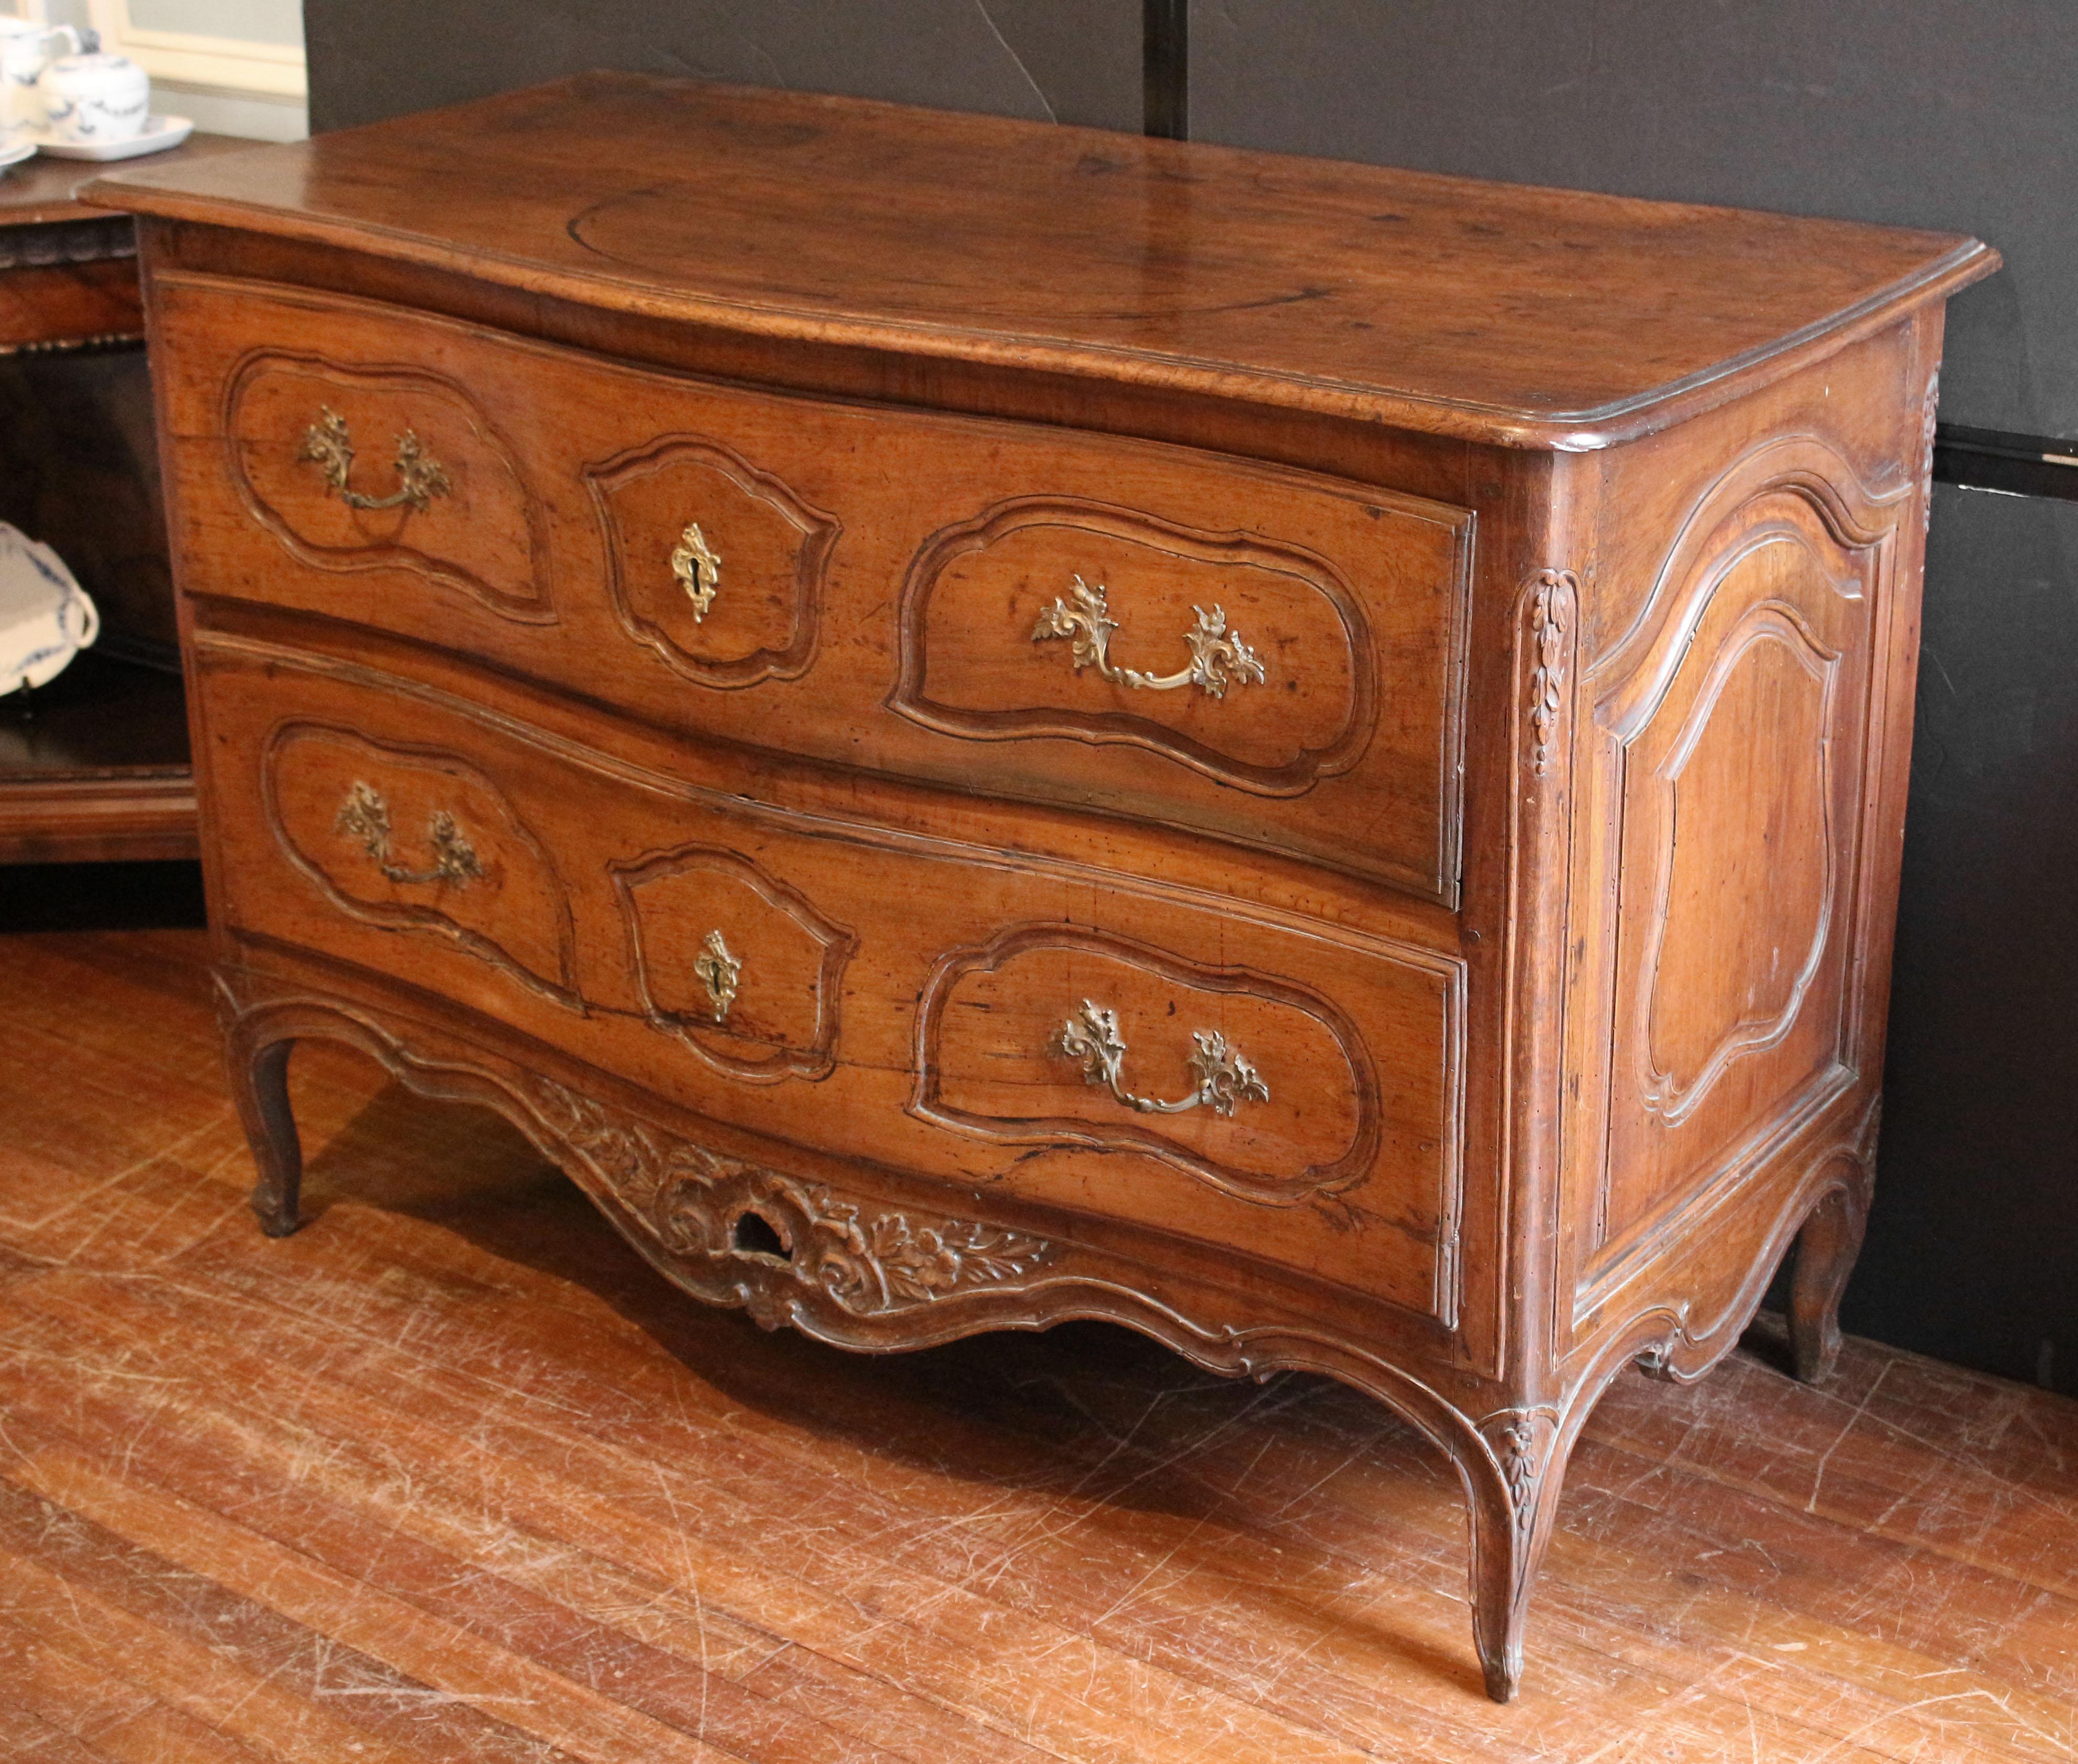 Circa 1735-55 French Rococo period commode from Provence. Walnut. Serpentine front; two drawers with triple asymmetrical shaped, molded cartouches; pierced, carved apron ending in well molded edge; raised on short floral carved cabriole legs ending